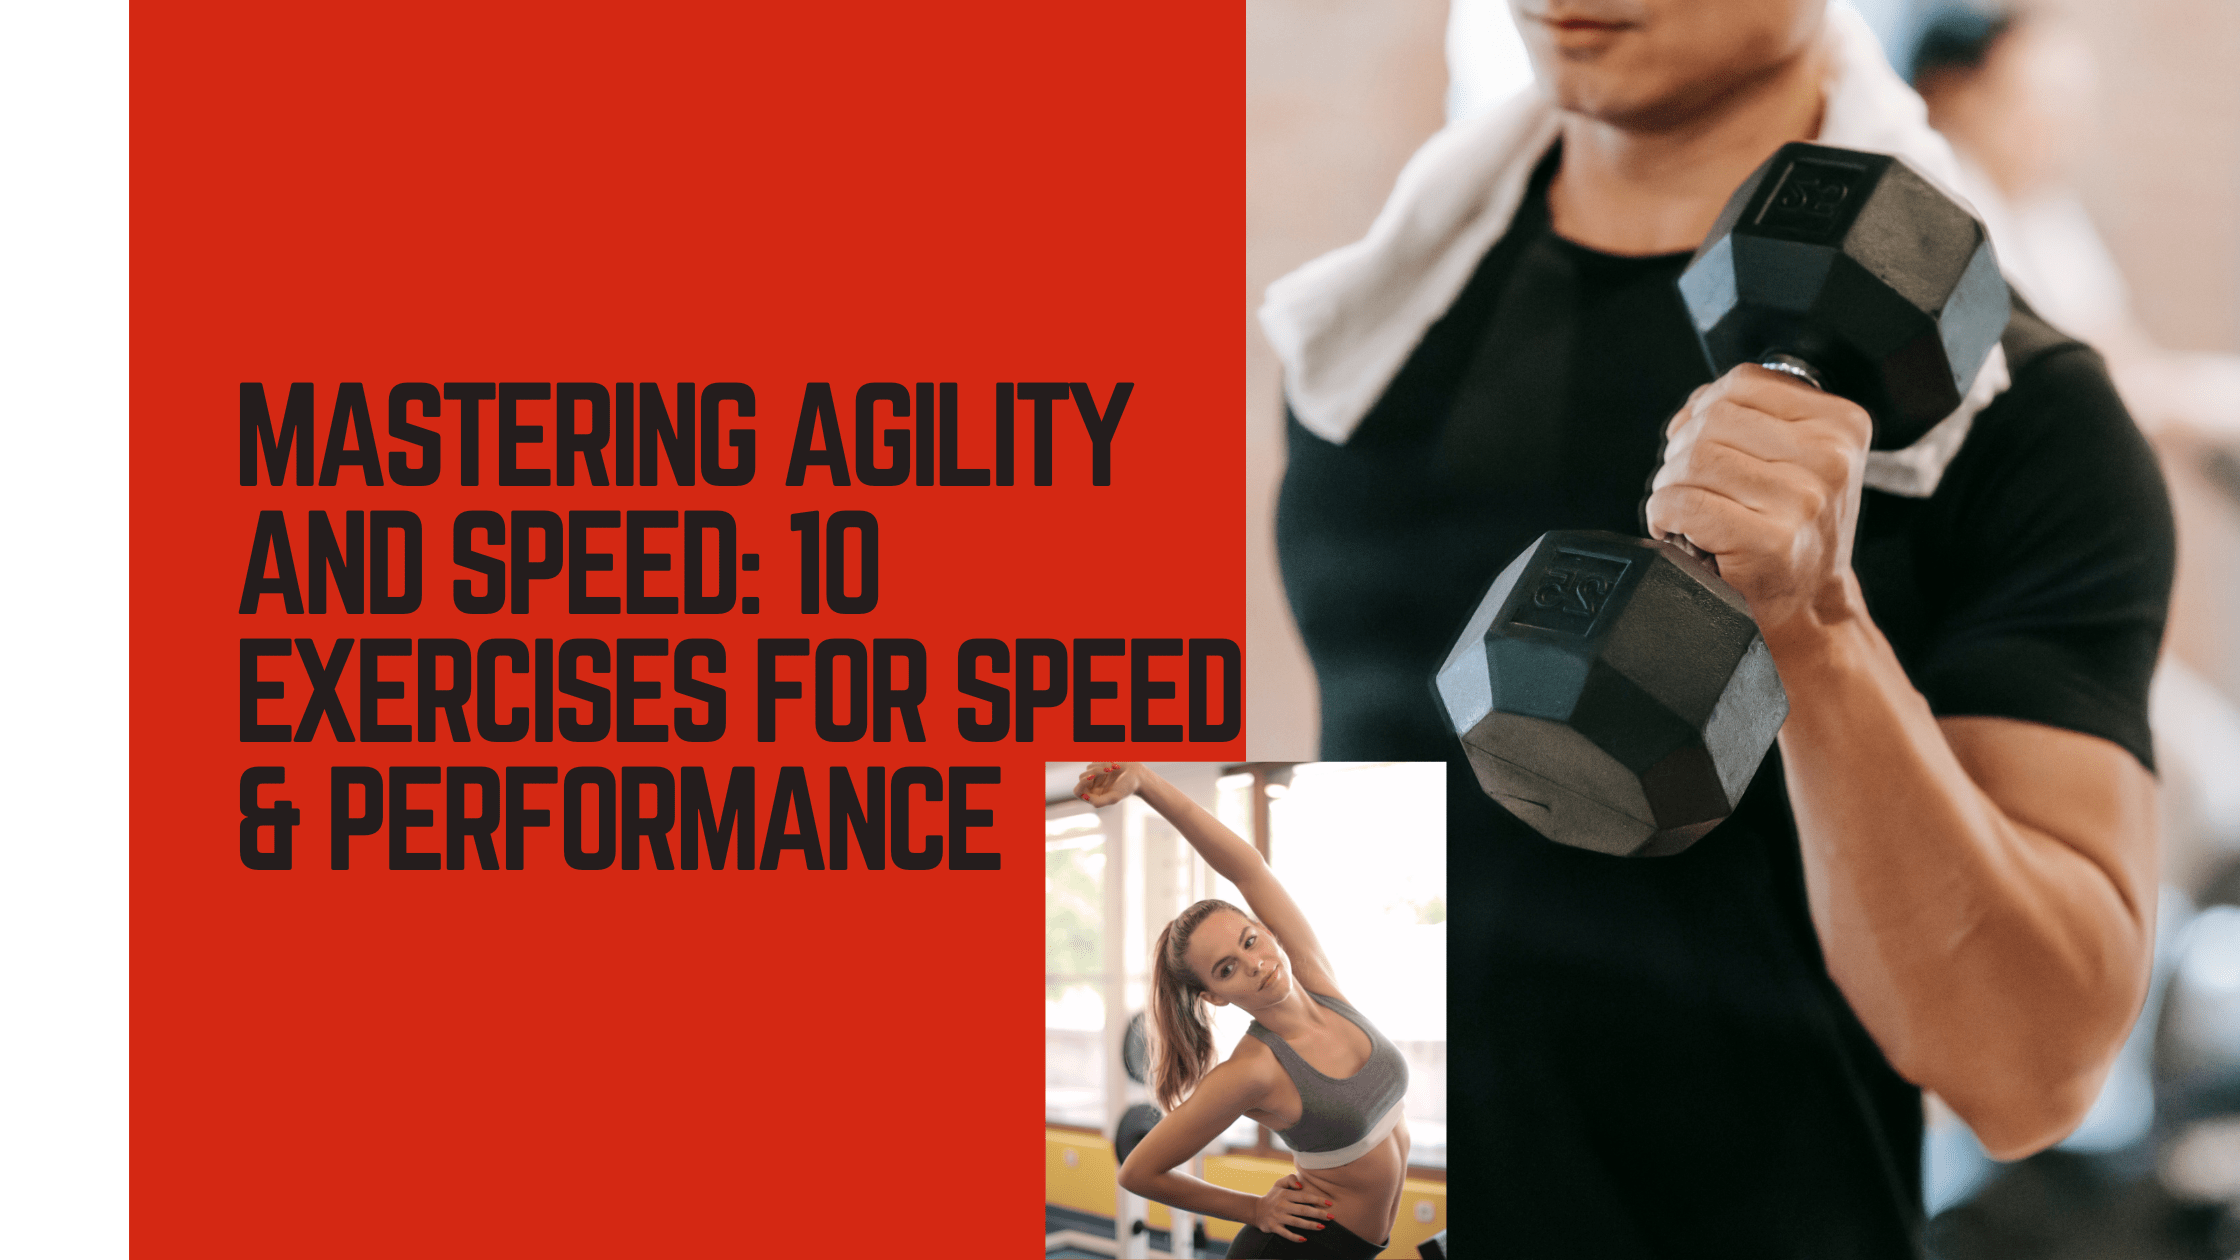 Mastering Agility and Speed: 10 Best Exercises for Speed & Performance